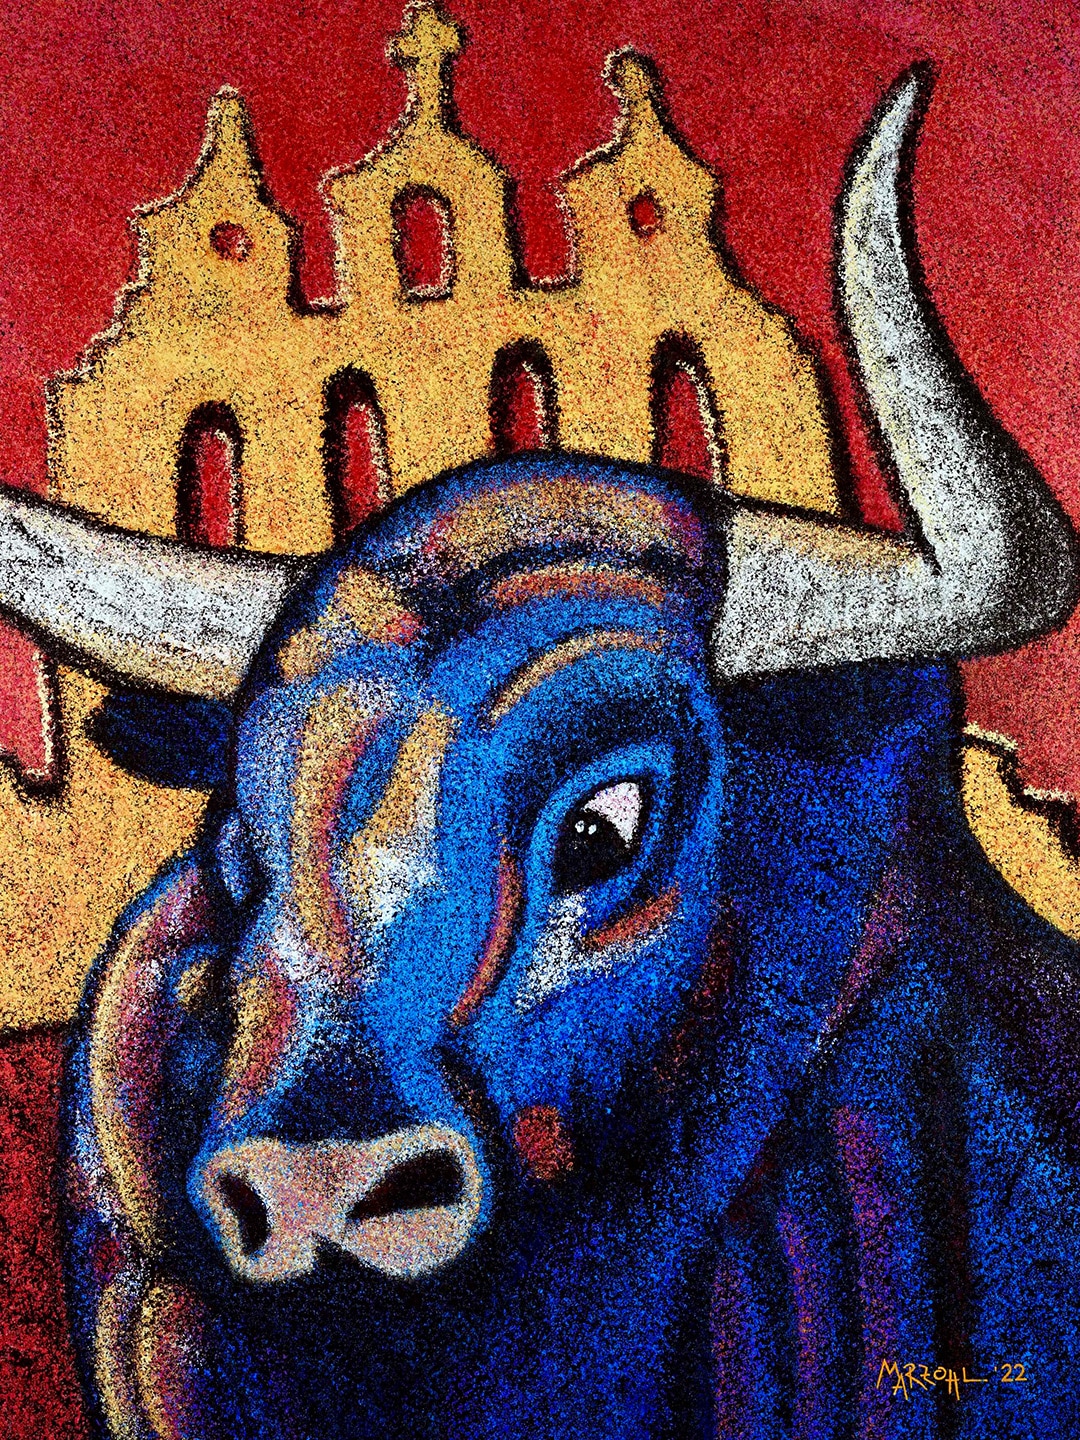 "The Bull Of Saintes Maries" by Heinz Marzohl